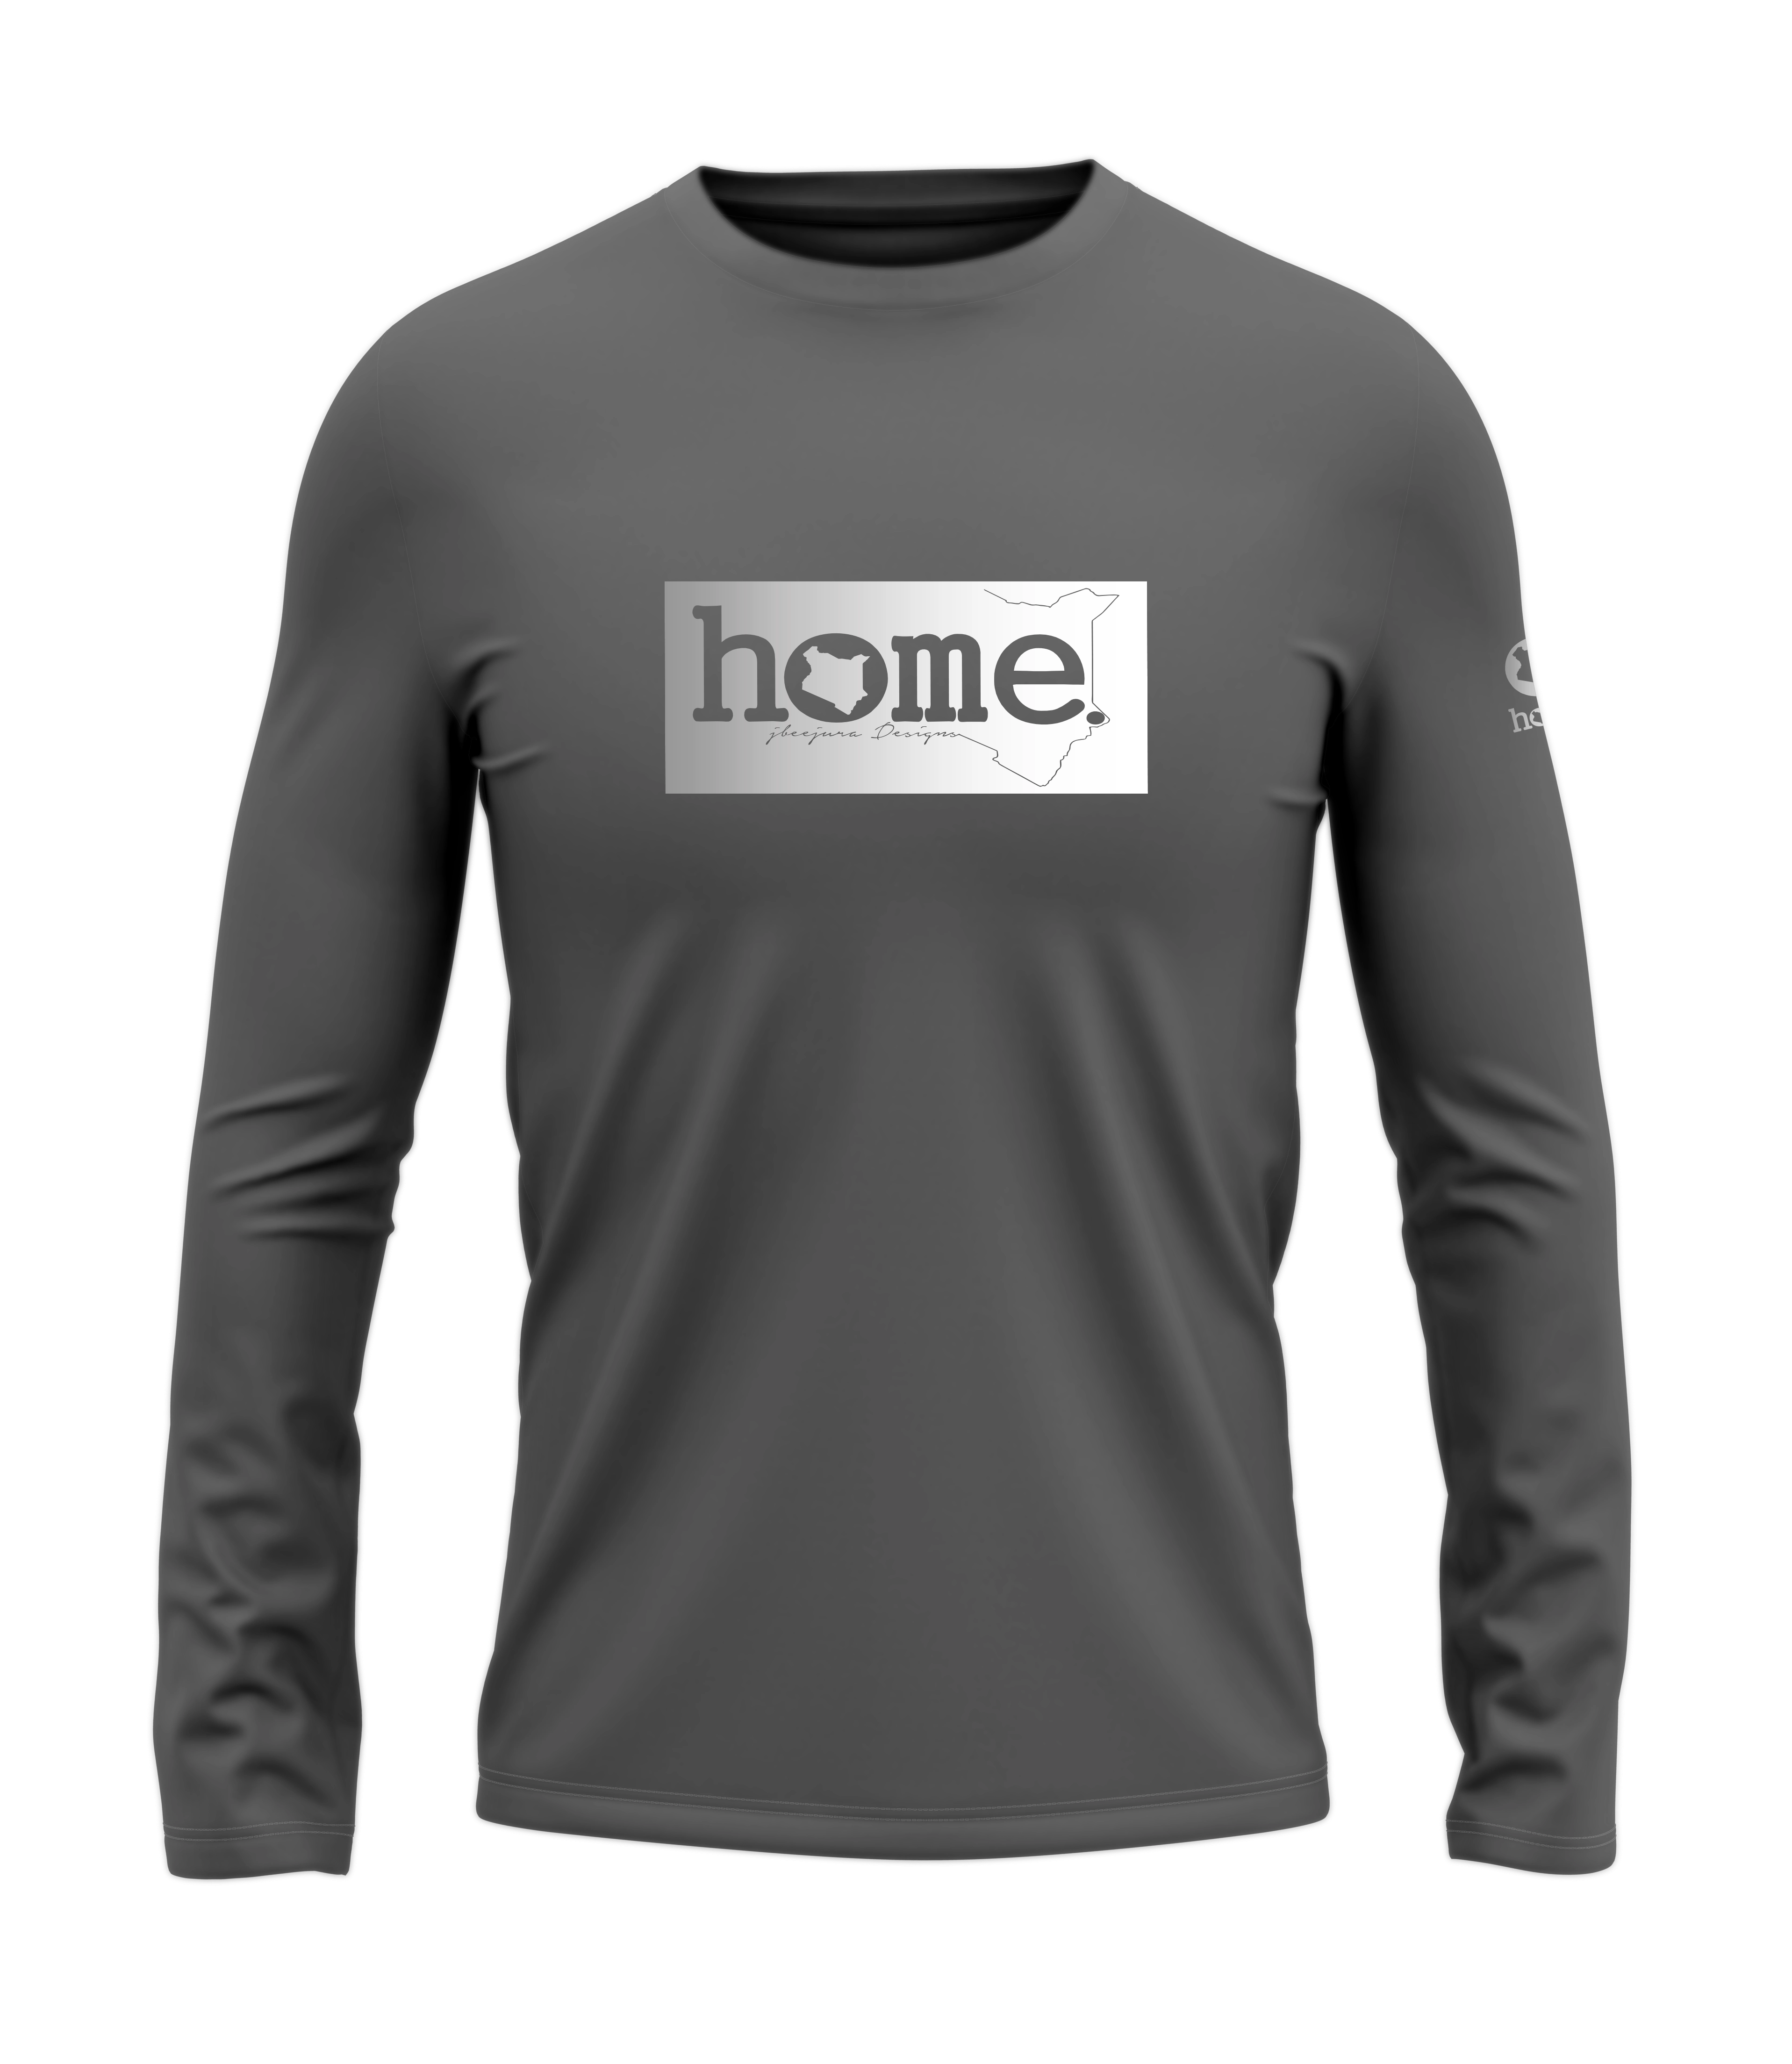 home_254 LONG-SLEEVED SAGE T-SHIRT WITH A SILVER CLASSIC PRINT – COTTON PLUS FABRIC